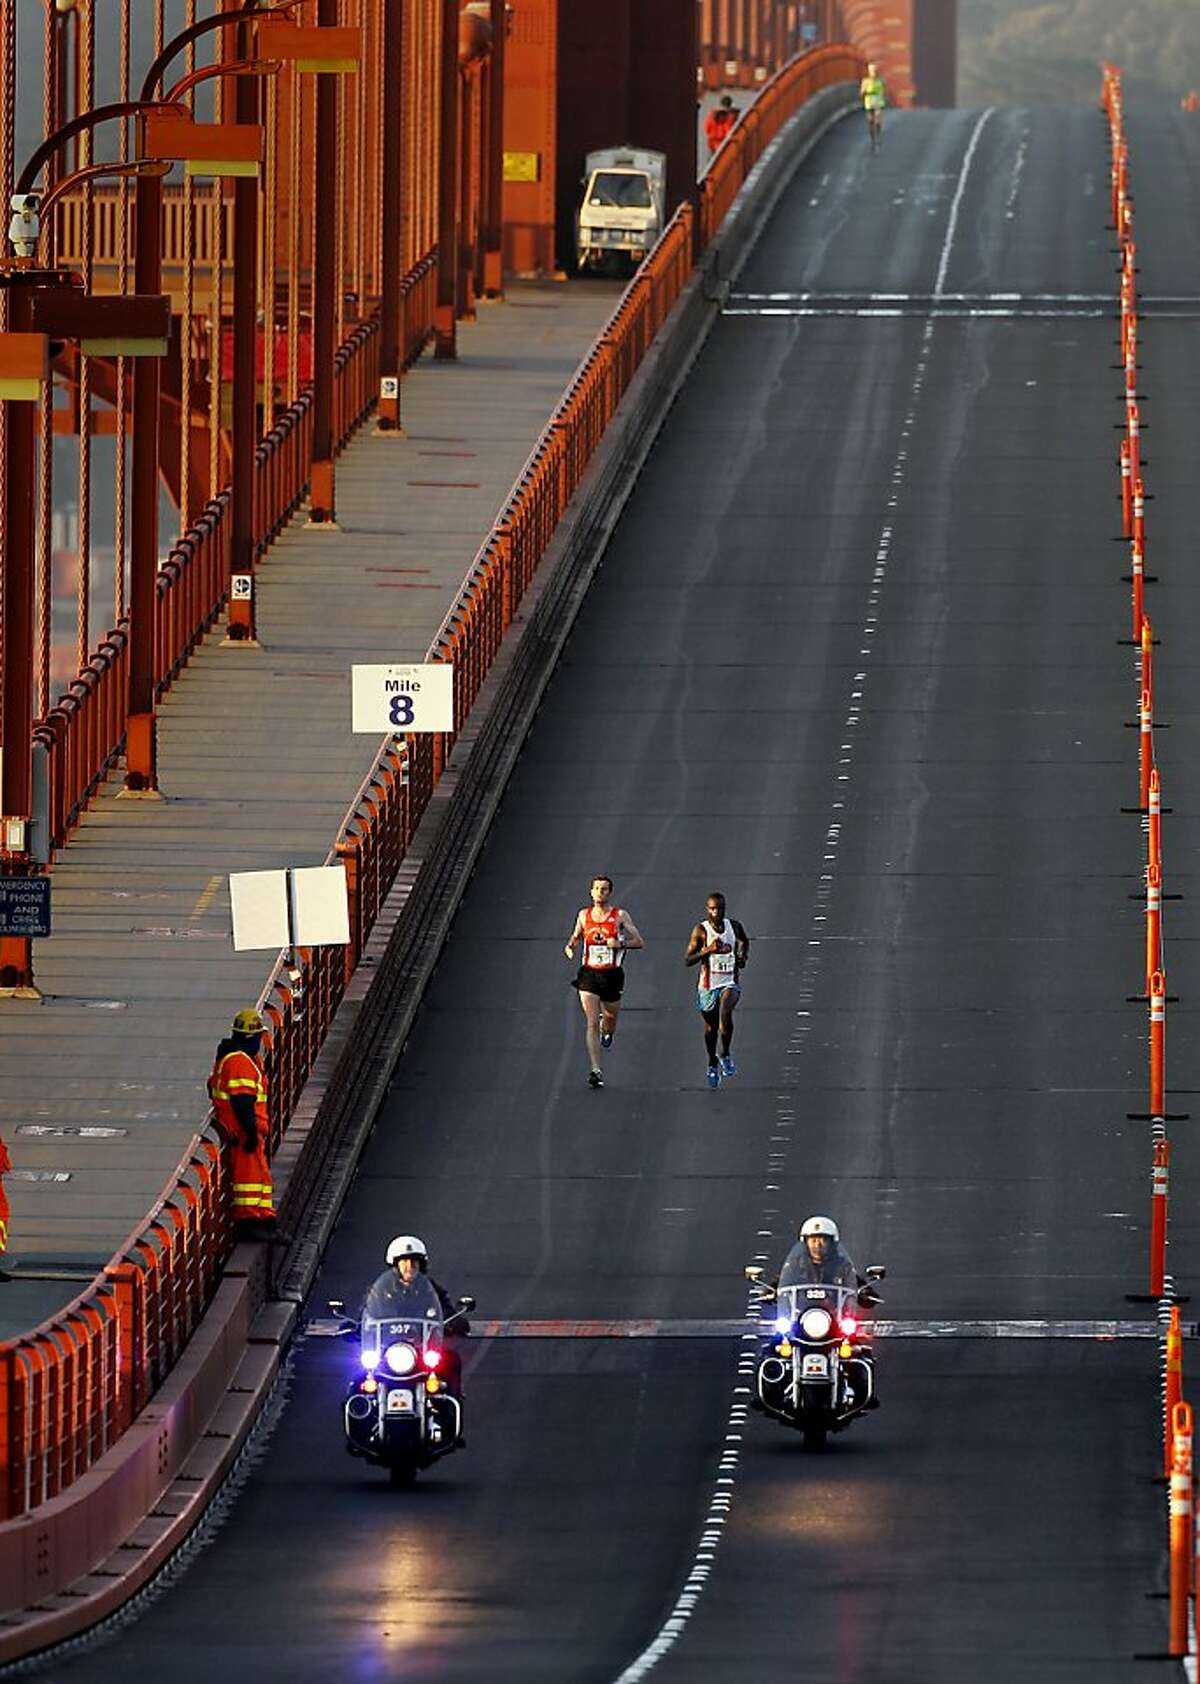 At mile eight, eventual marathon winner Francois Lhuissier (left) and second place finisher Ismail Ssenyange had the Golden Gate Bridge to themselves Sunday June 16, 2013. Thousands ran in the annual San Francisco Marathon, which was held earlier this year to accommodate the America's Cup races.